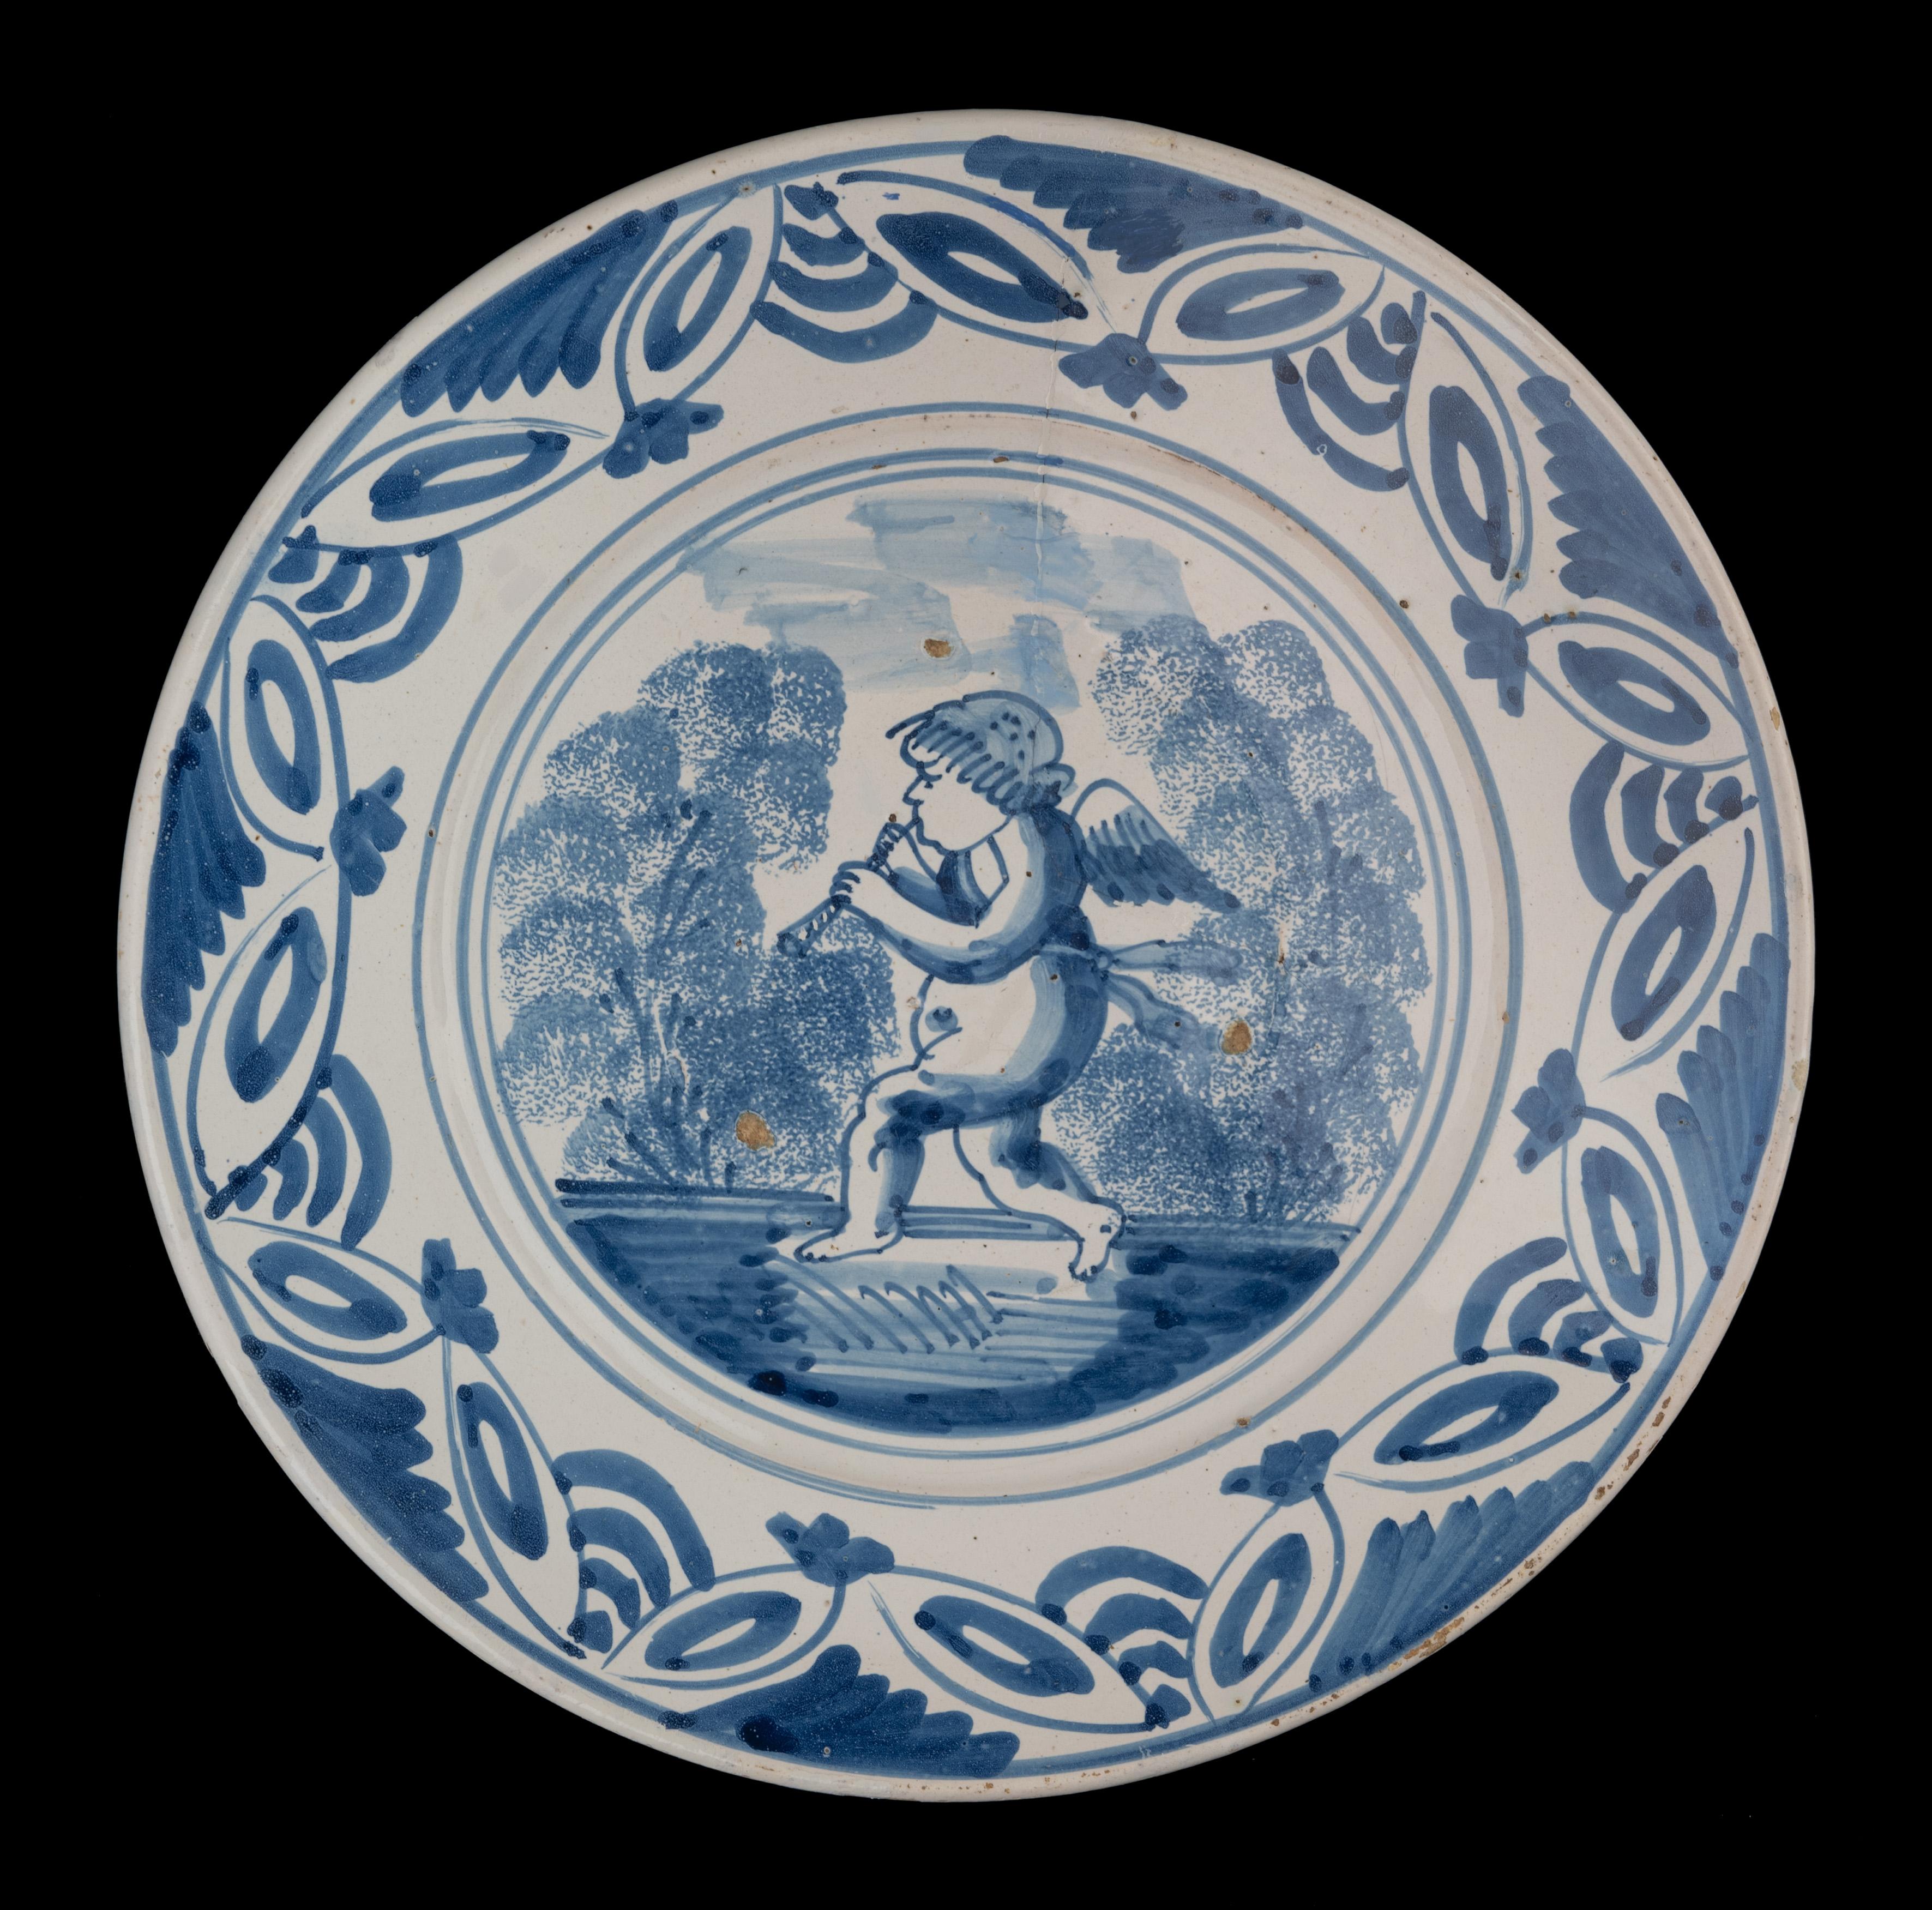 Blue and white dish with a putto. The Netherlands, 1660-1700 

The blue and white dish has a wide, spreading flange, and is painted in the centre with a walking, flute-playing putto in a simplified landscape in a double circle. The well is